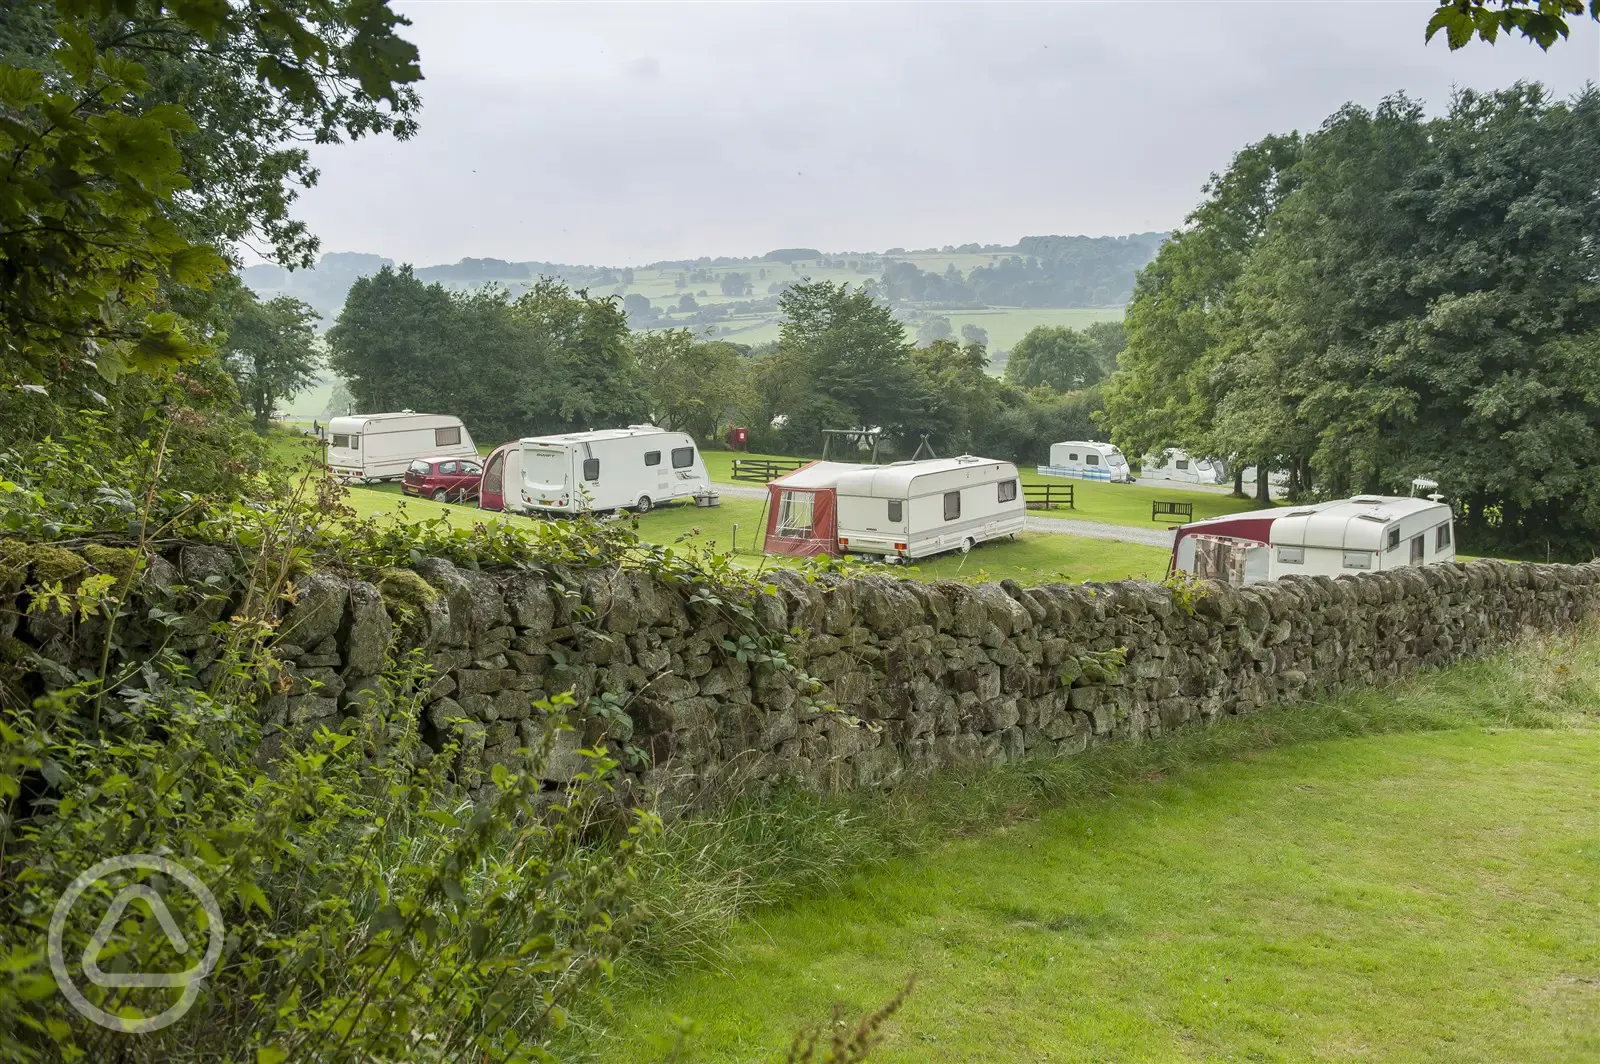 View of Bakewell Club Campsite